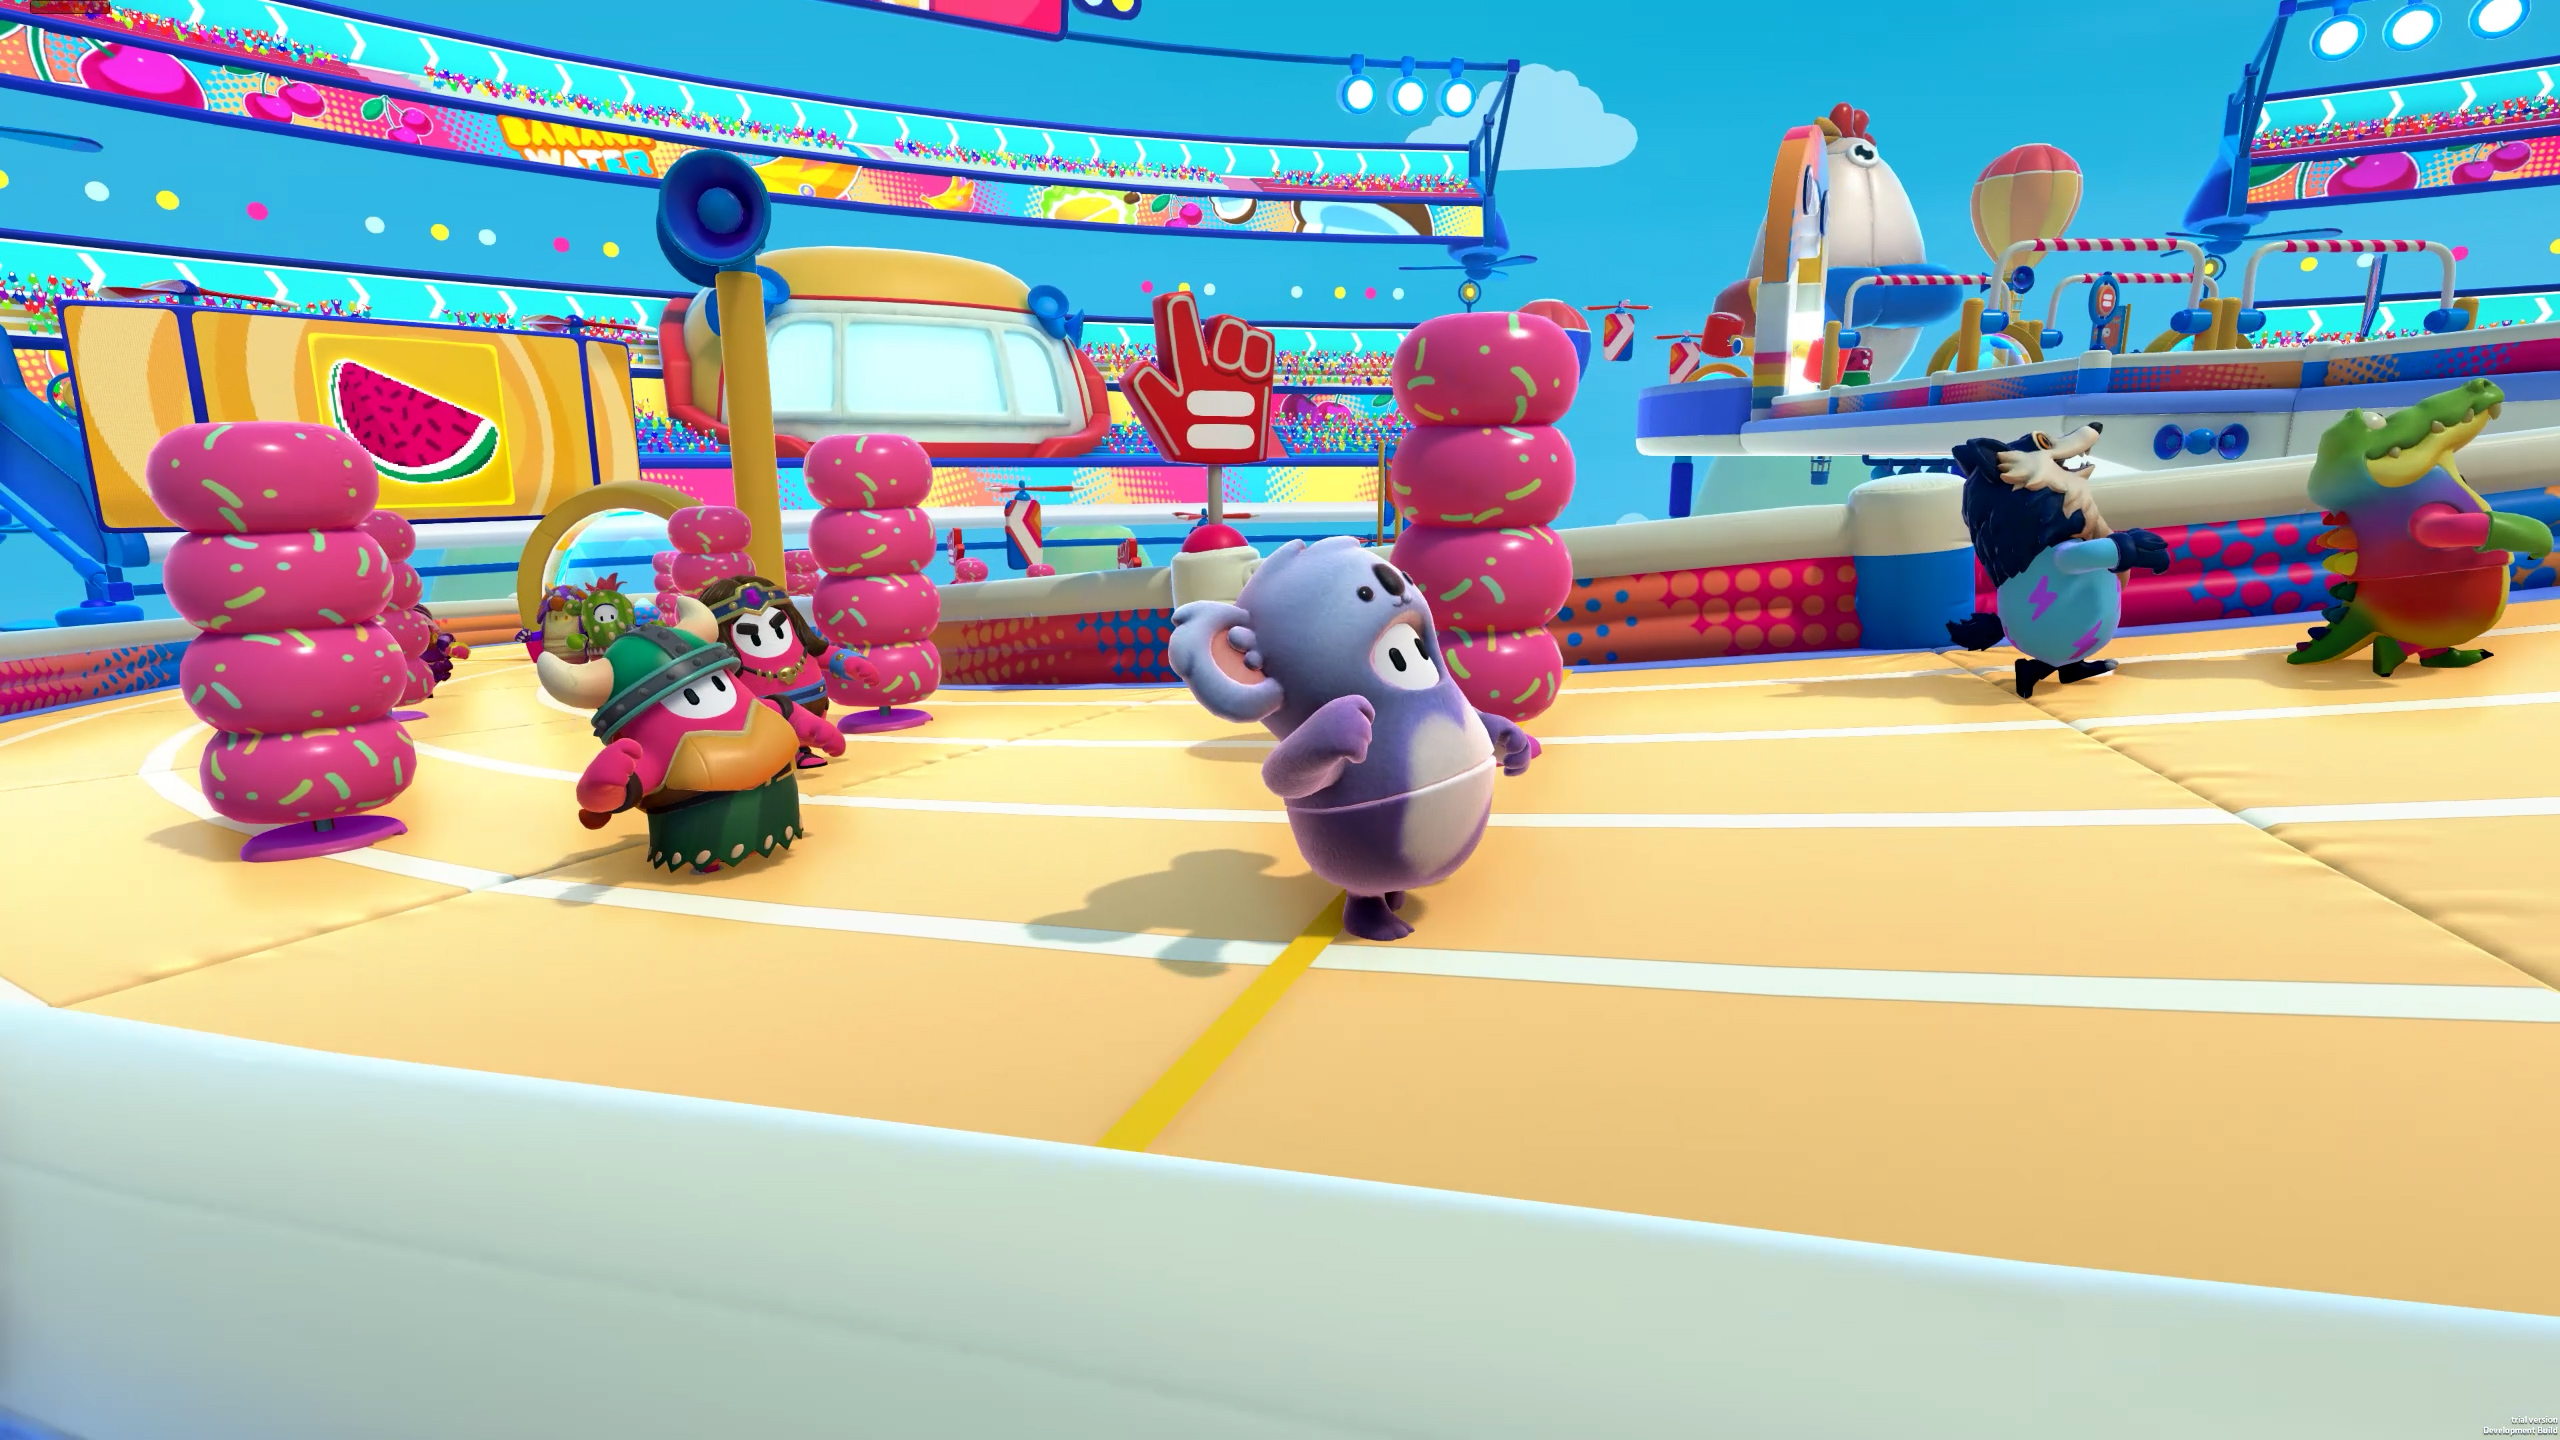 Various beans compete on a race track, avoiding stacks of donuts, in a screenshot from Fall Guys